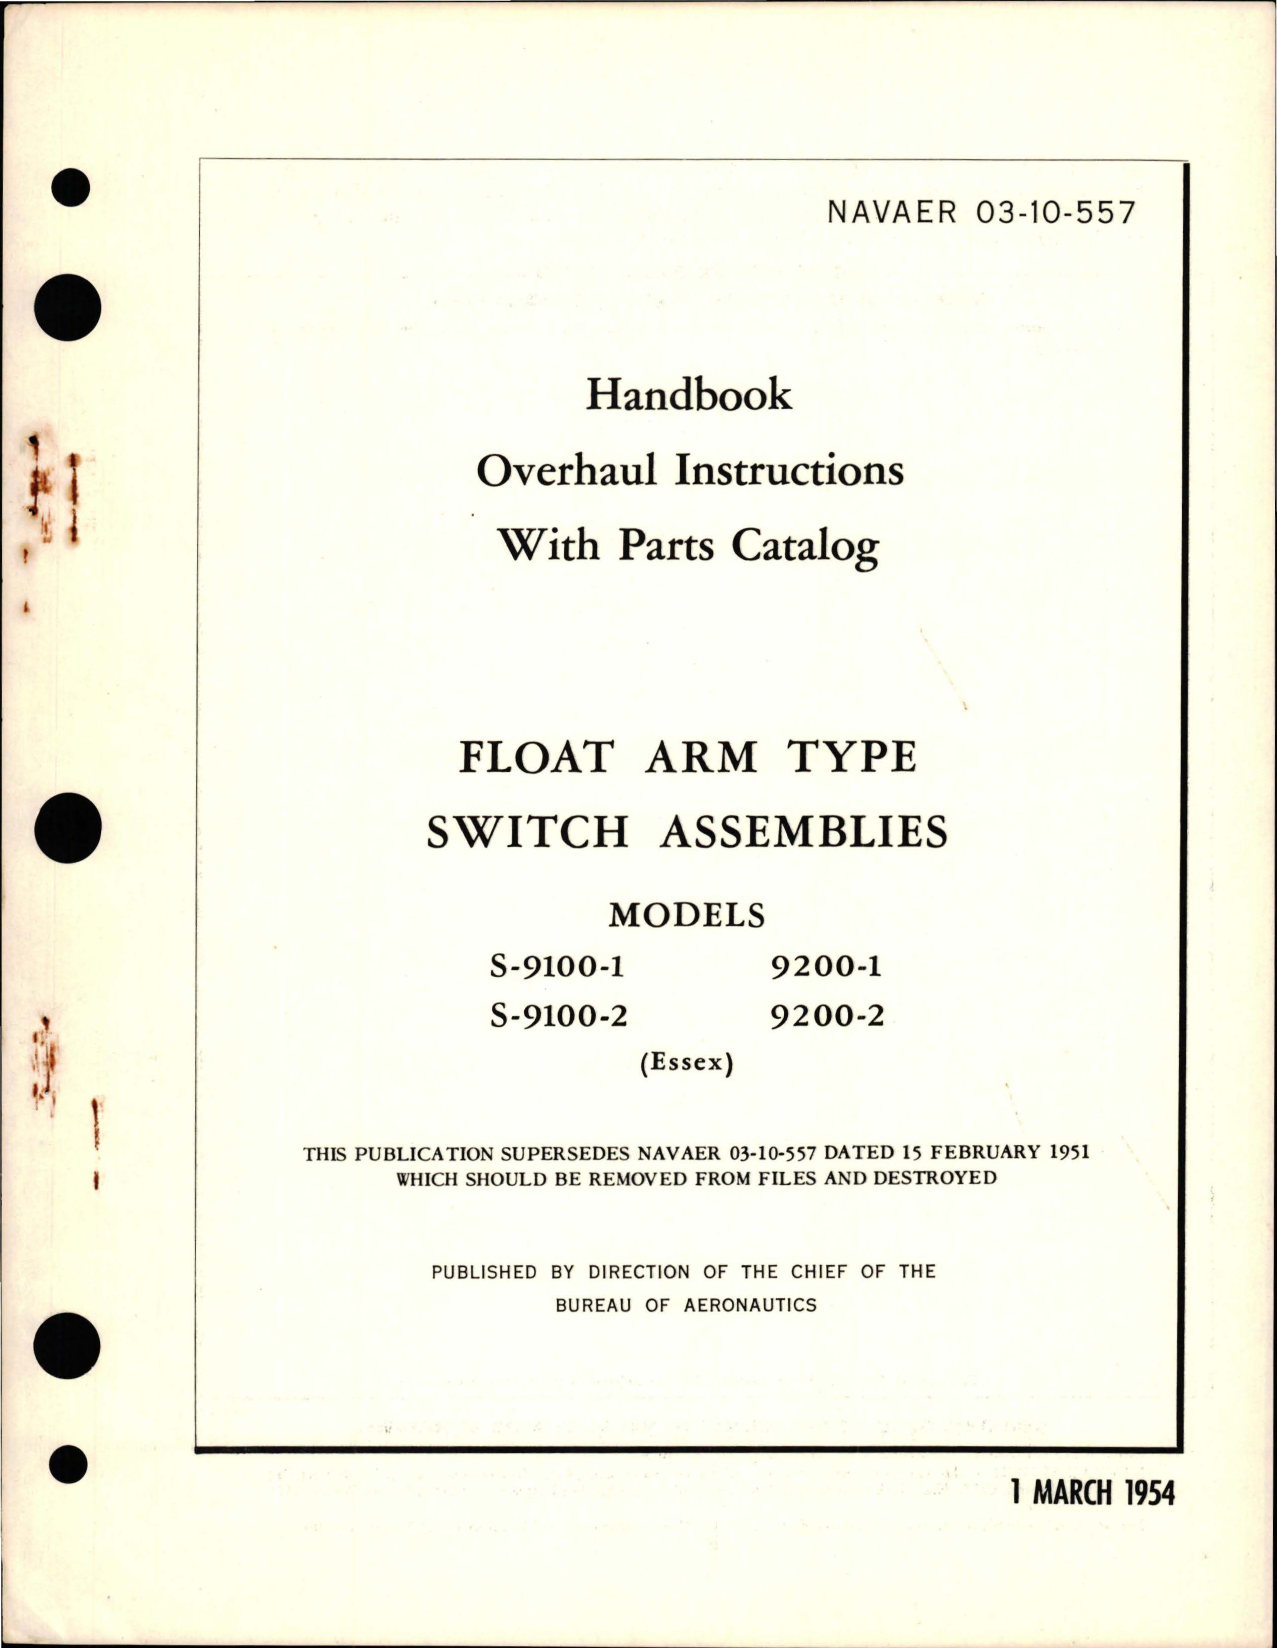 Sample page 1 from AirCorps Library document: Overhaul Instructions with Parts Catalog for Float Arm Type Switch Assembly - Models S-9100-1, S-9100-2, S-9200-1, and S-9200-2 